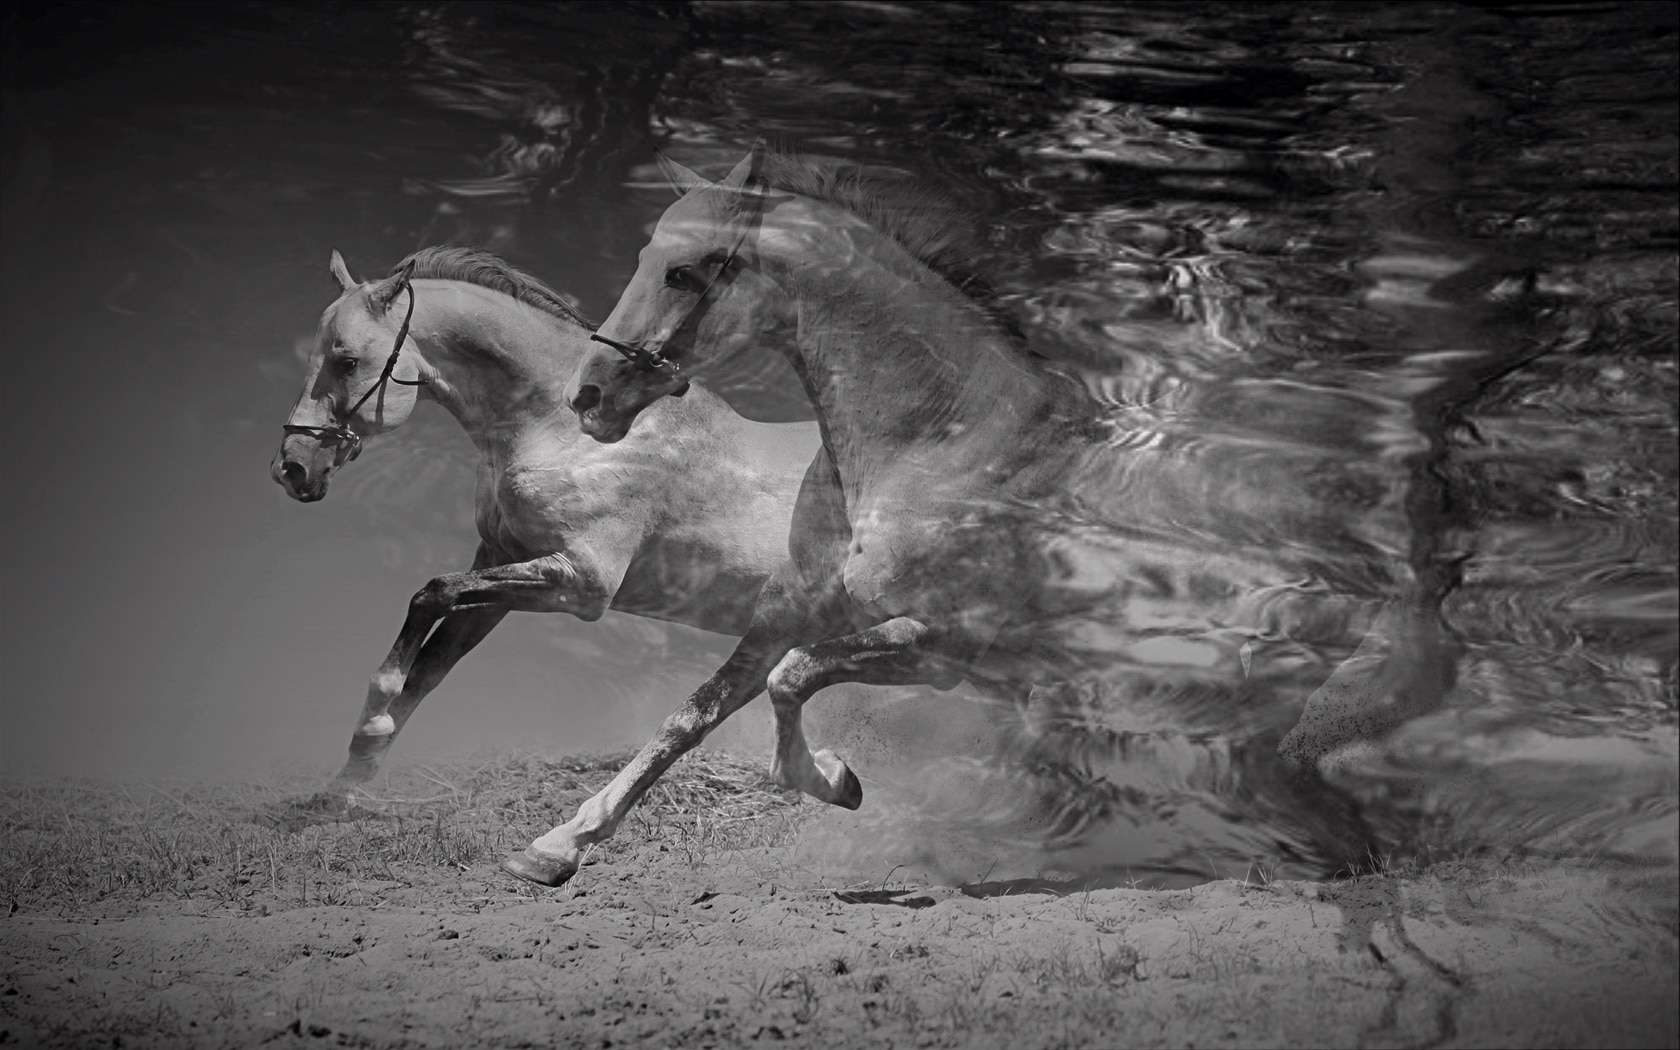 horses in water, monochrome